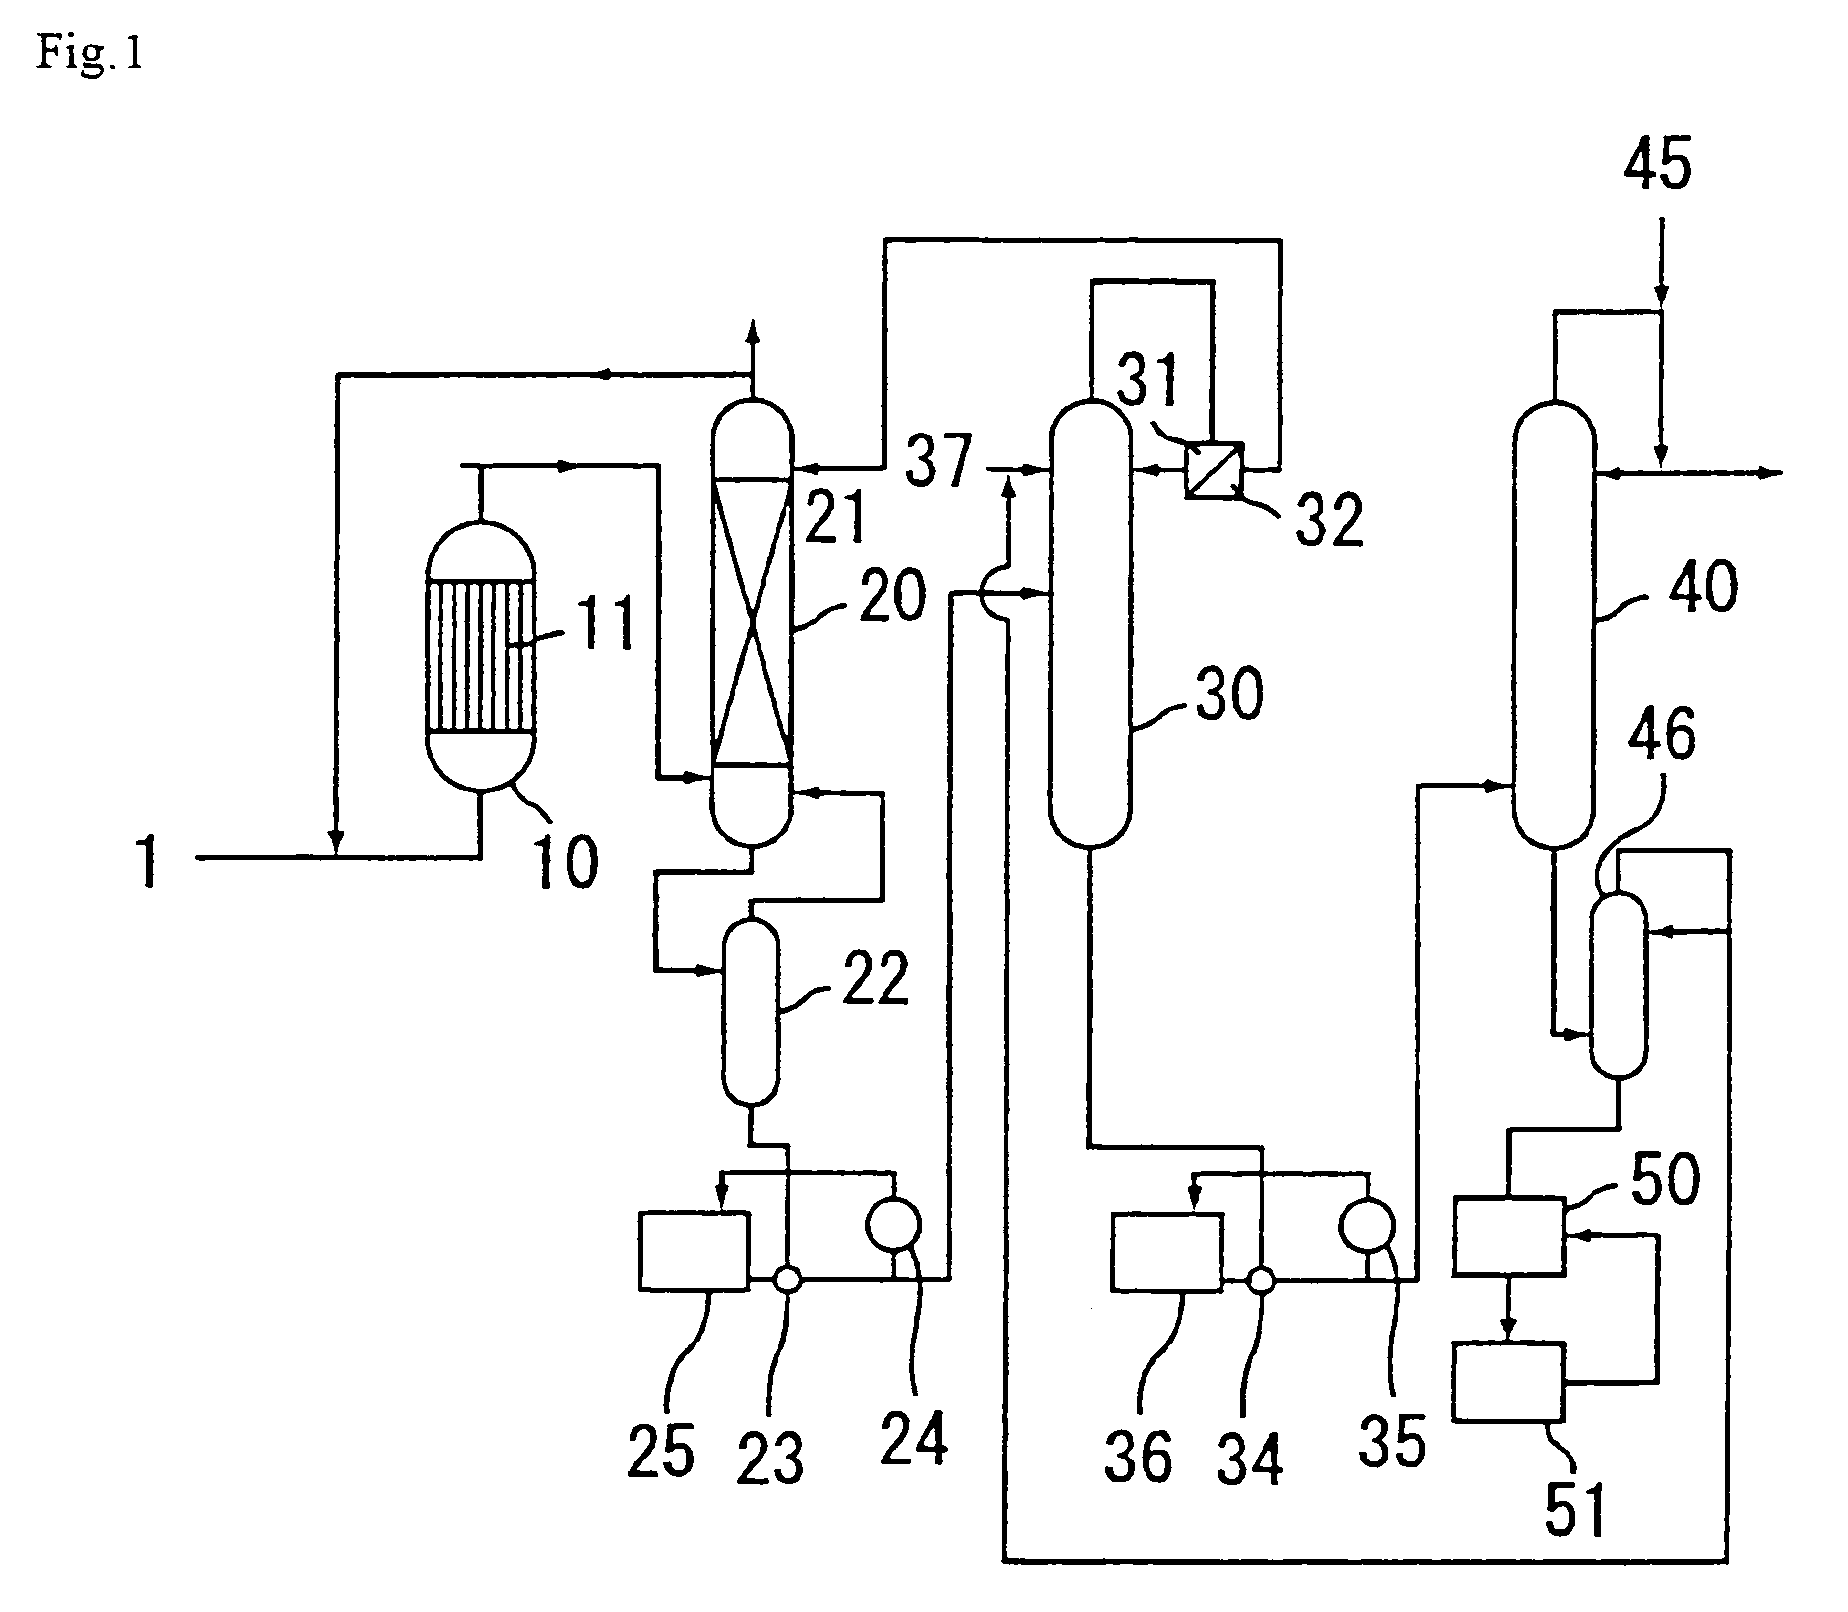 Process for producing aliphatic carboxylic acid